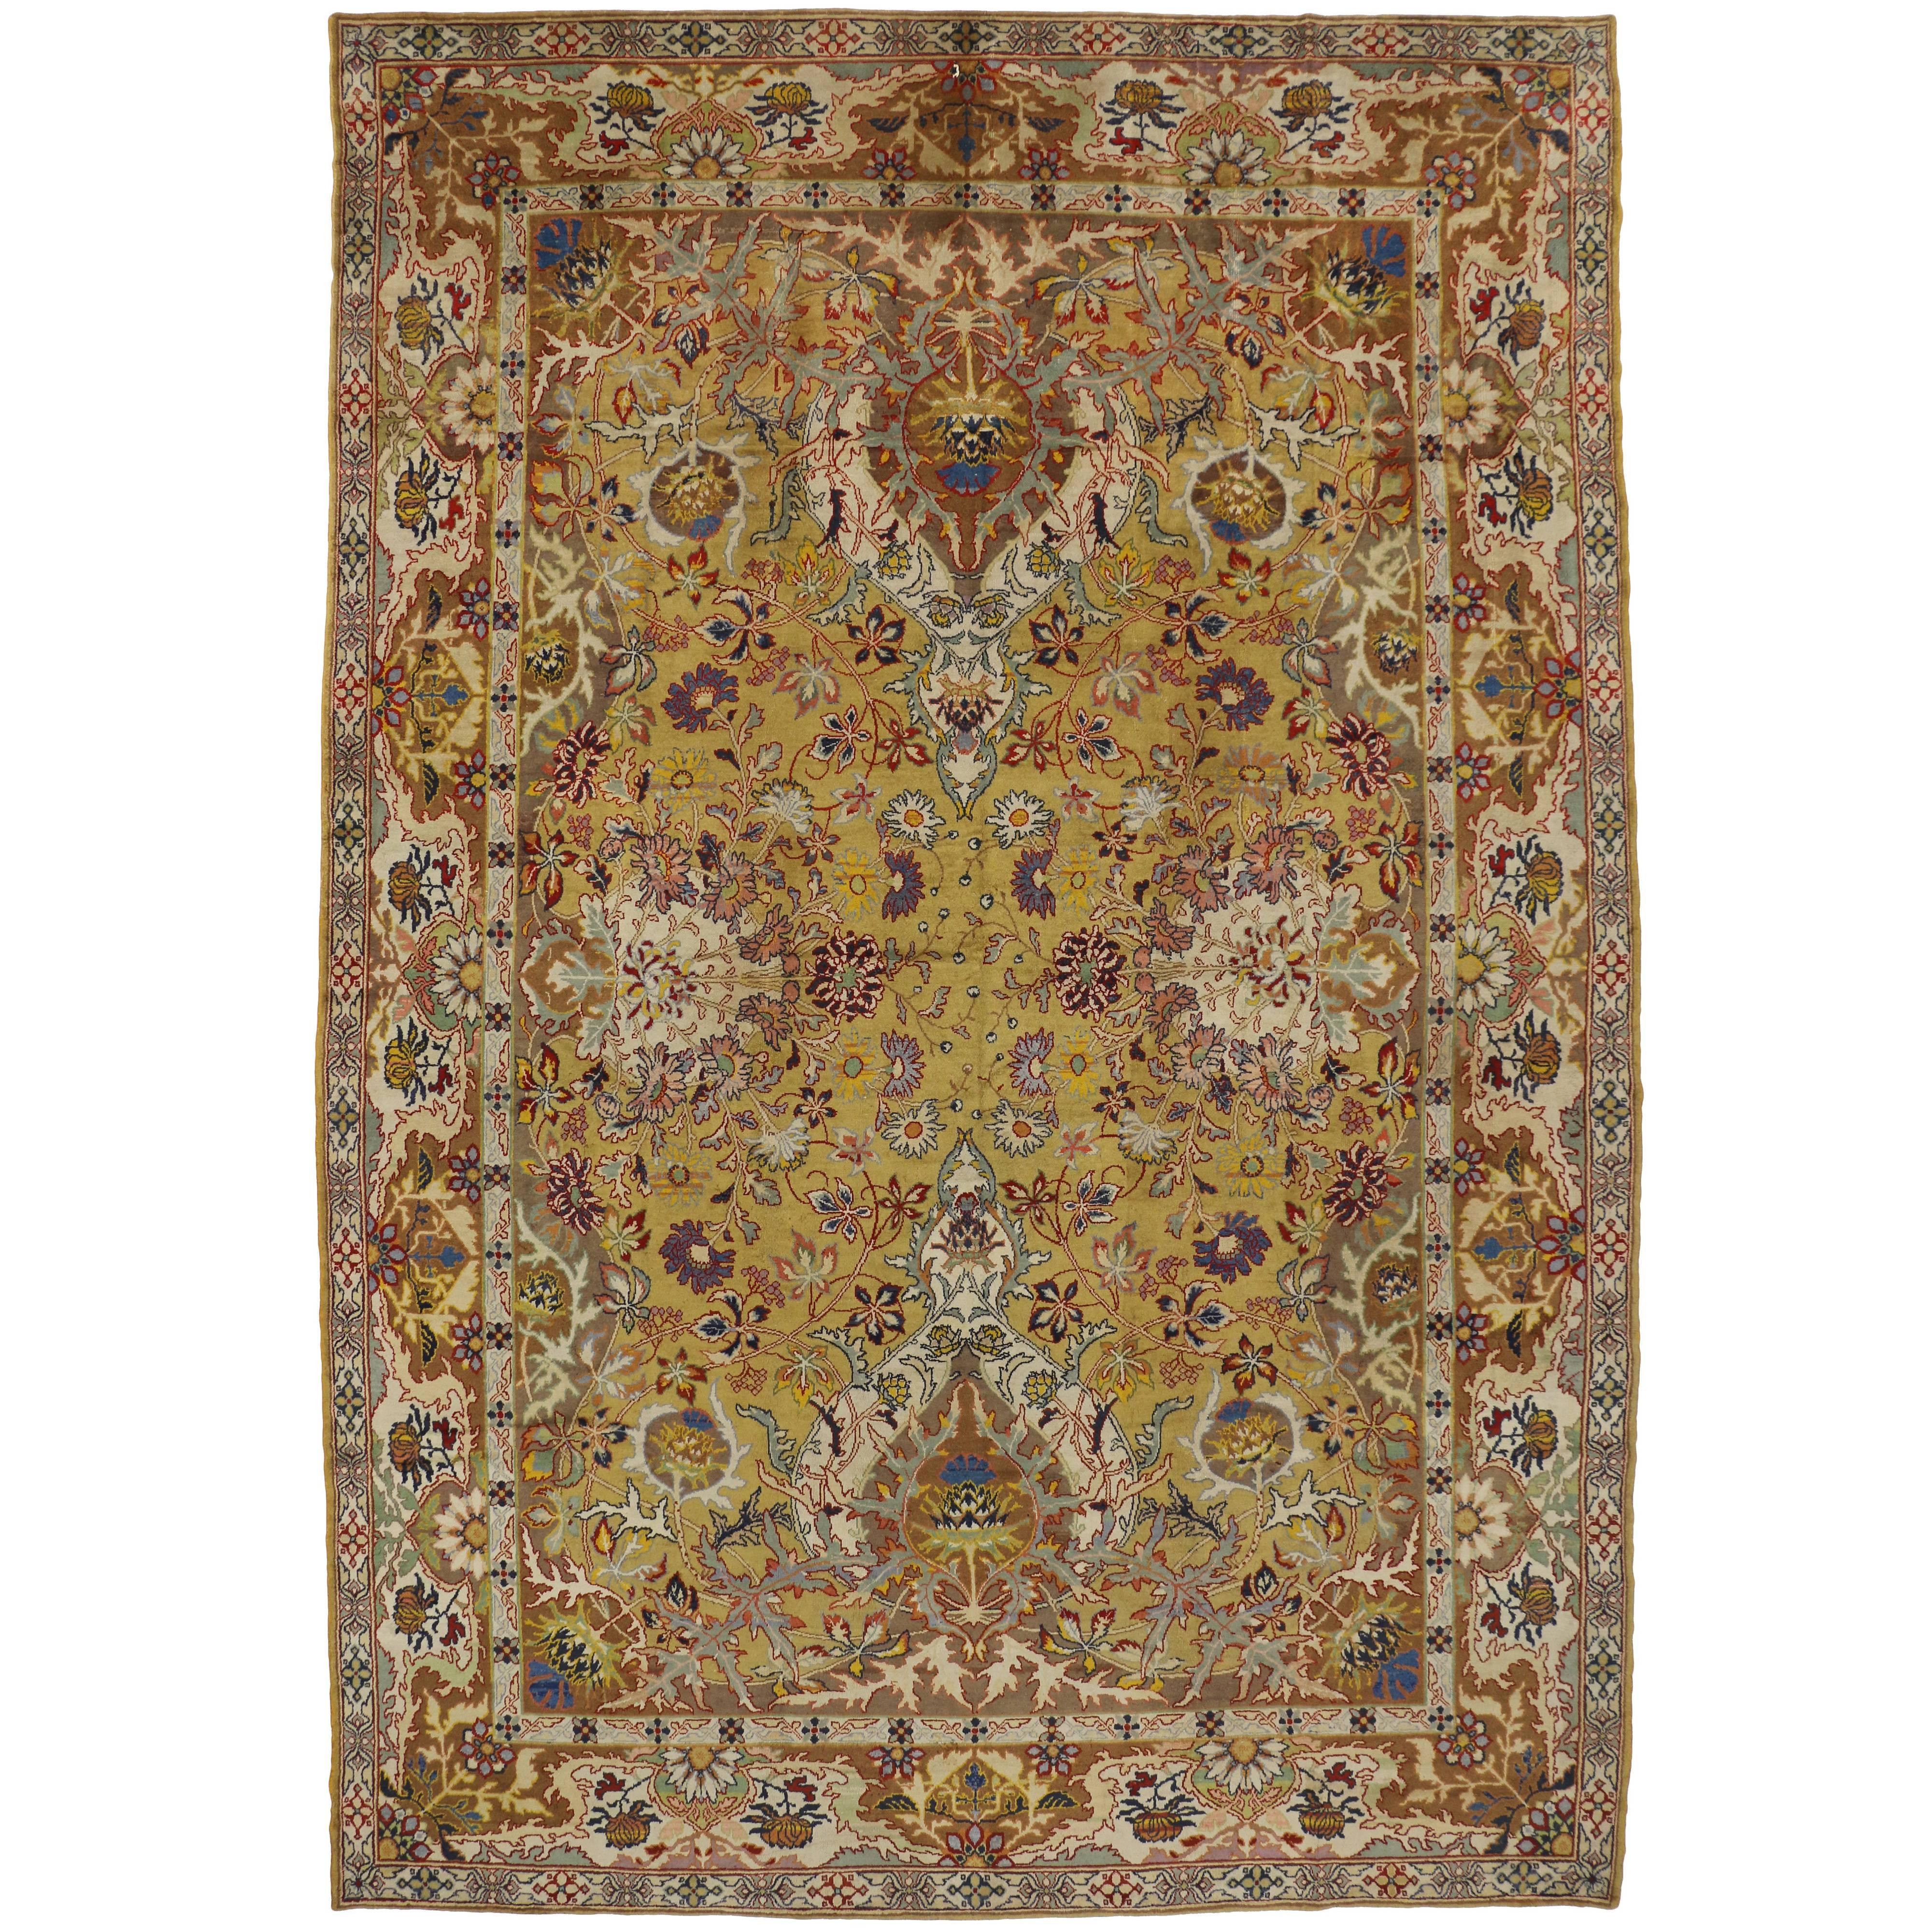 Antique European Rug with Oushak Design and Traditional Modern Style